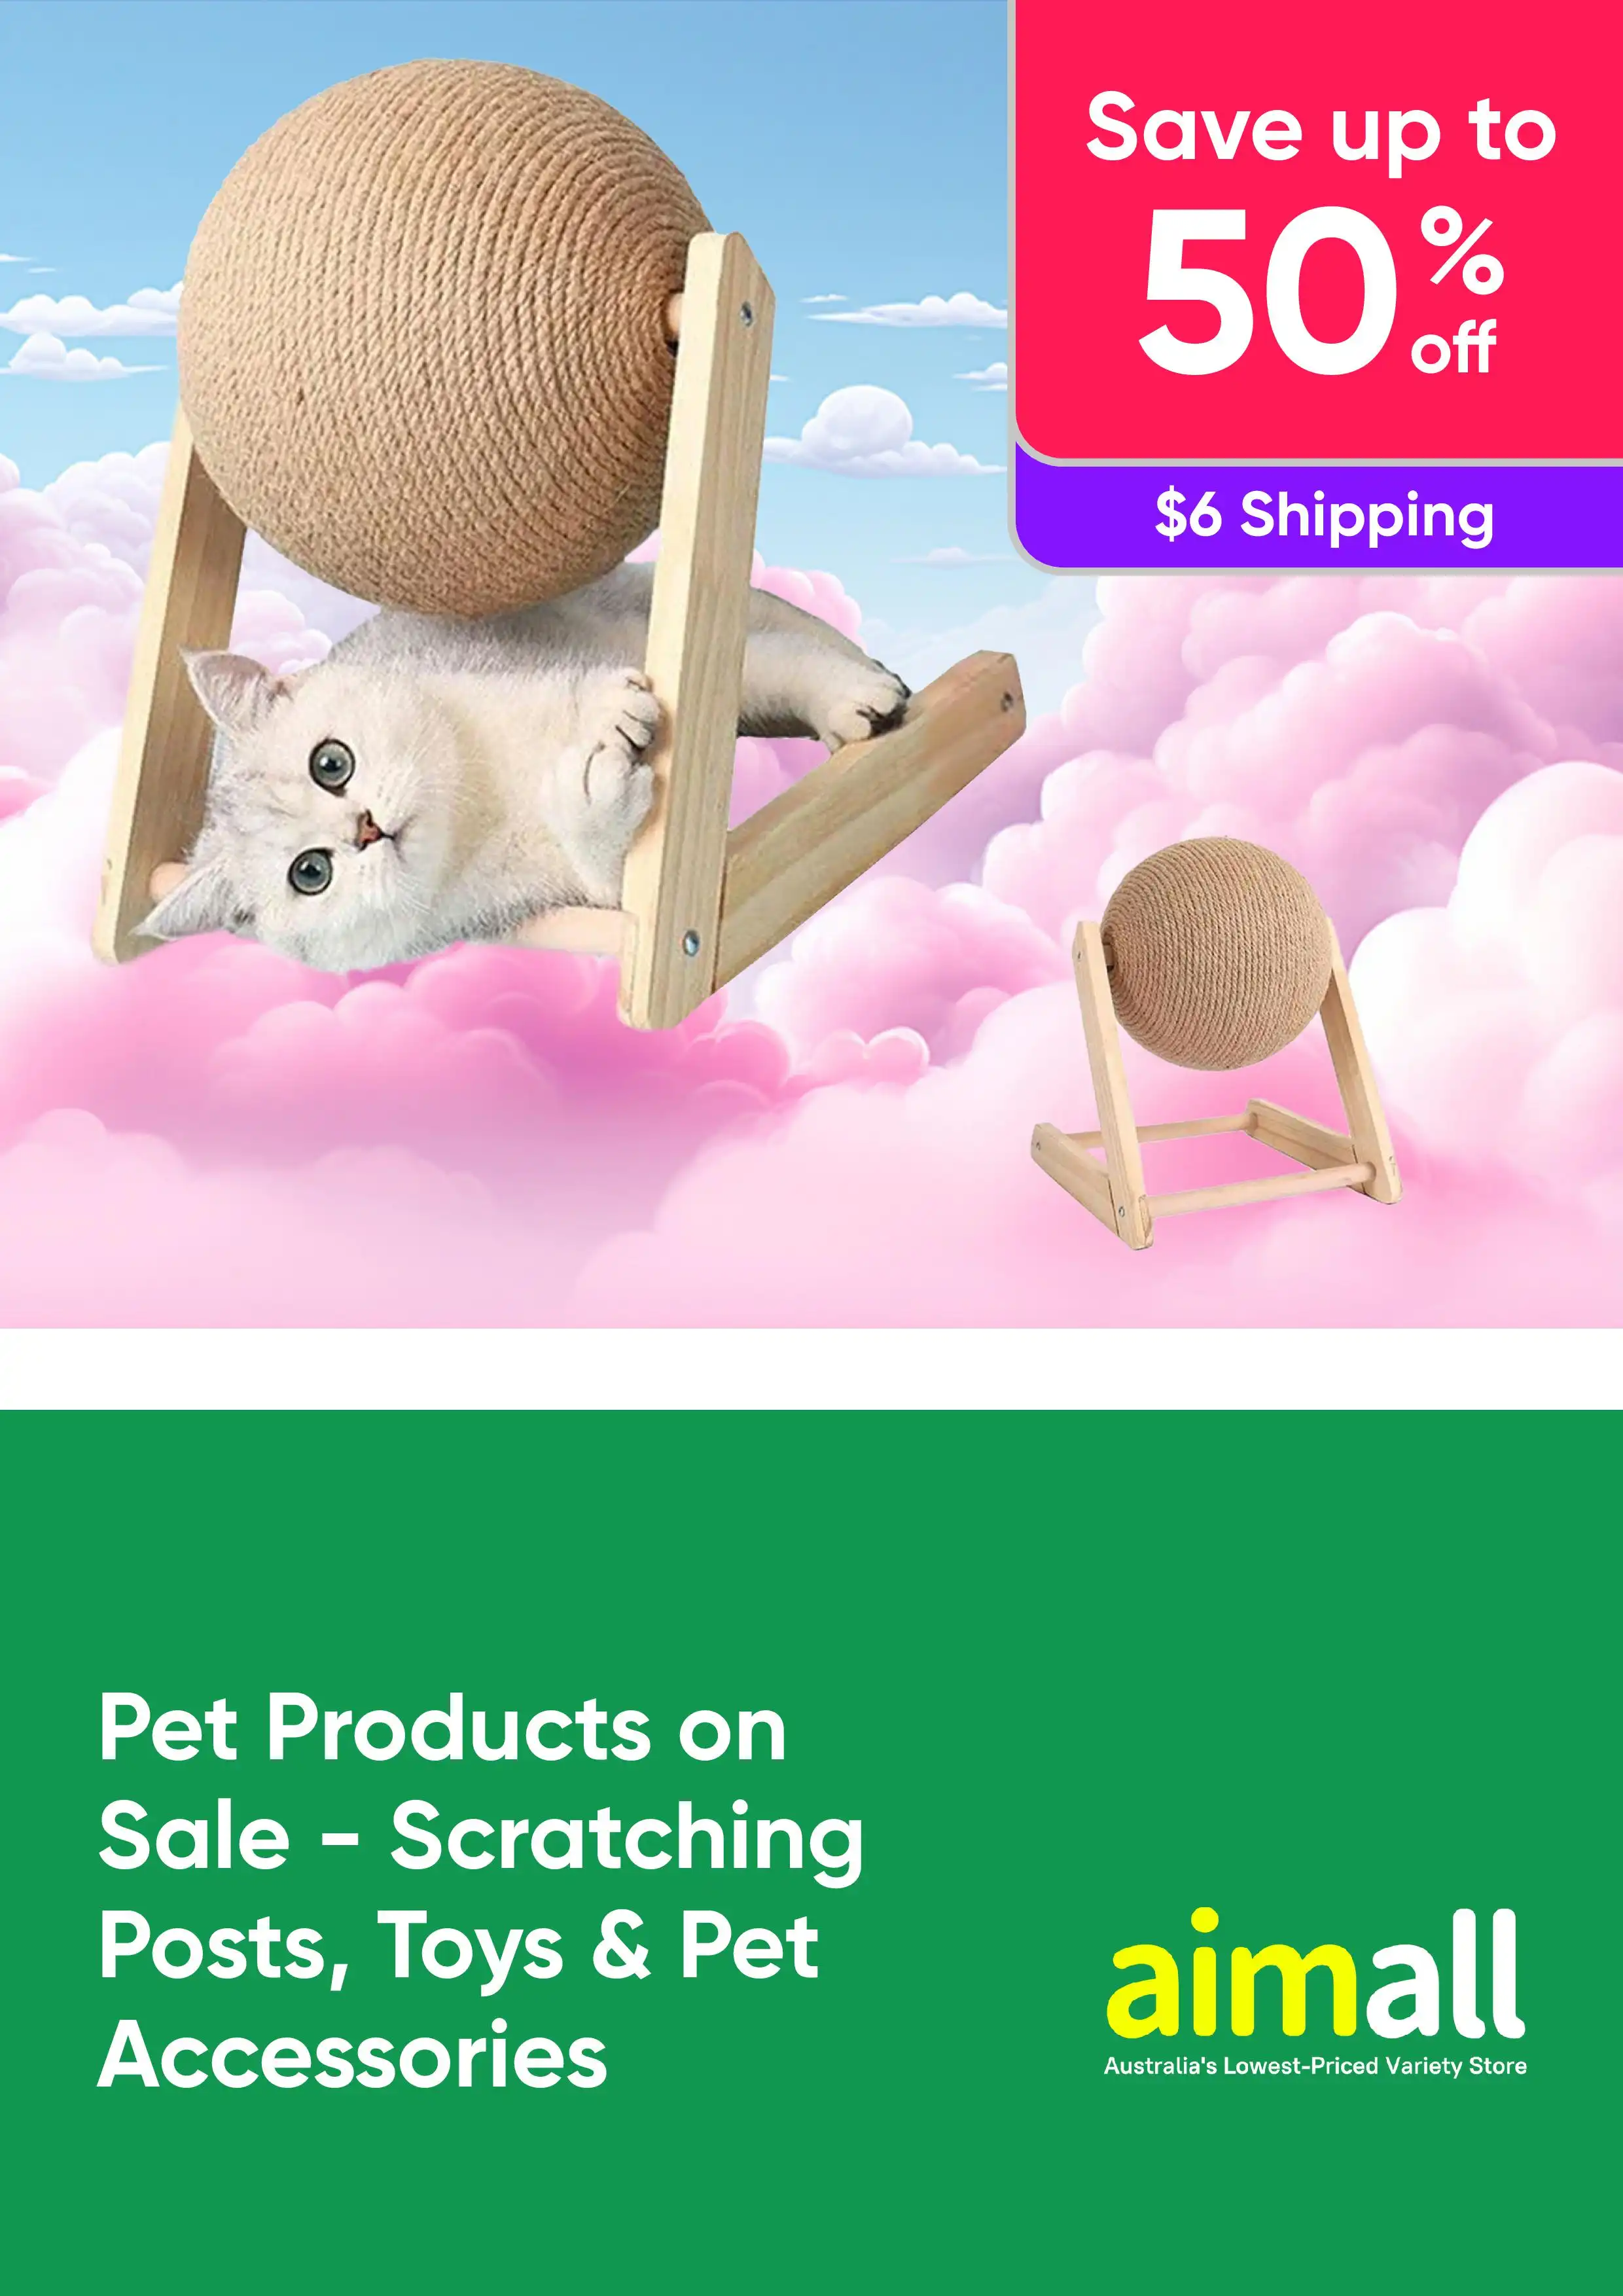 Up to 50% Off Pet Products - Scratching Posts, Toys, Pet Accessories 